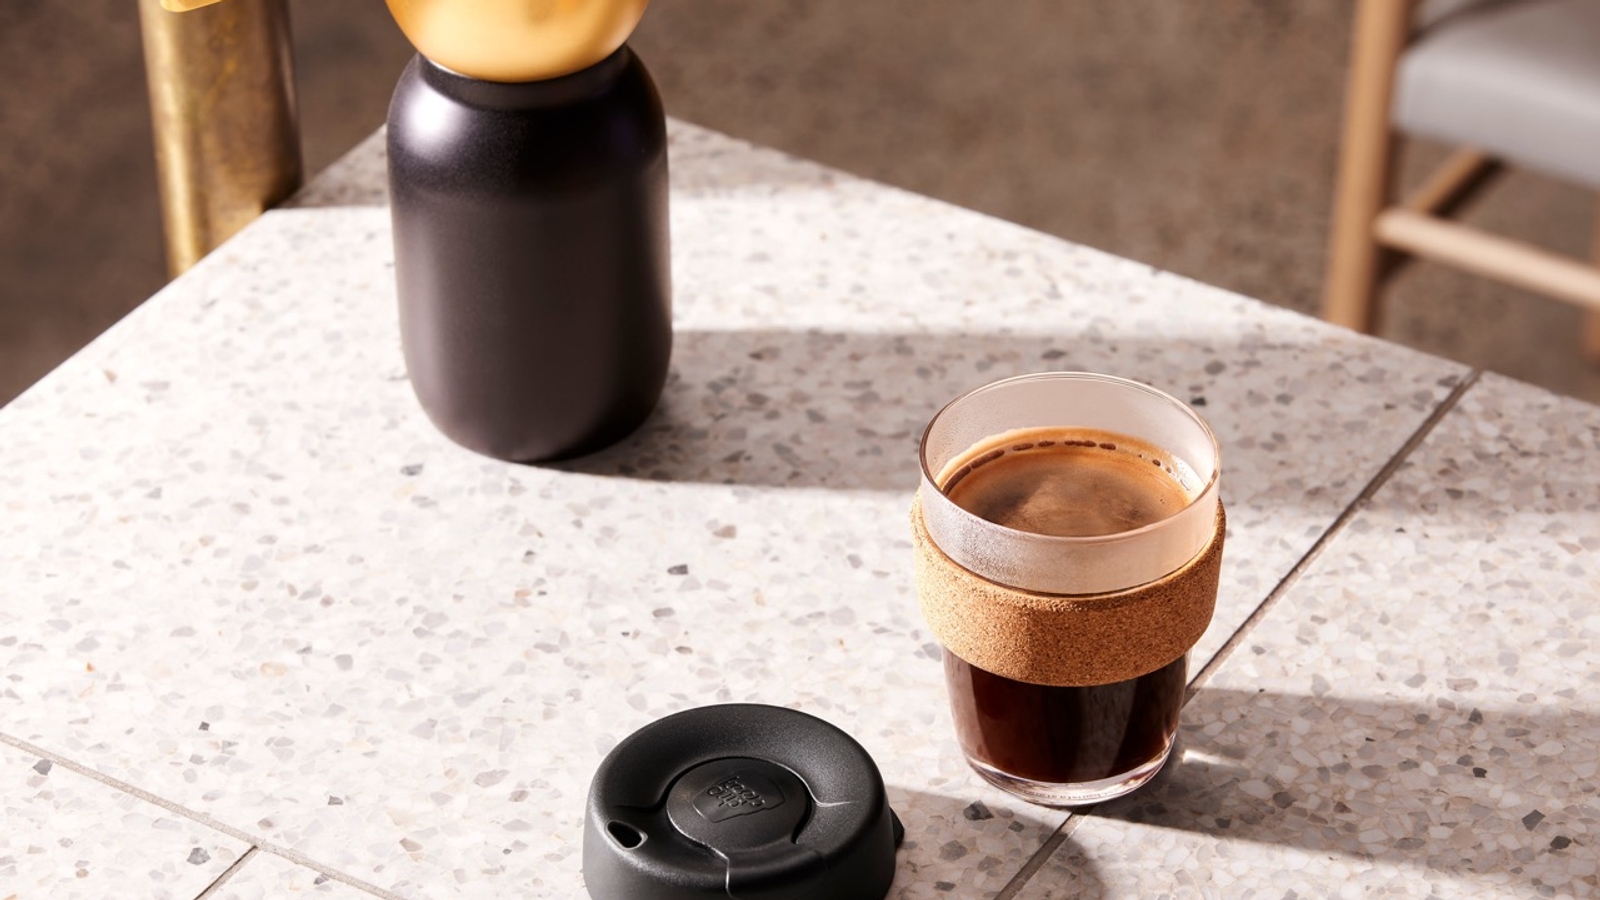 KeepCup with coffee on a table